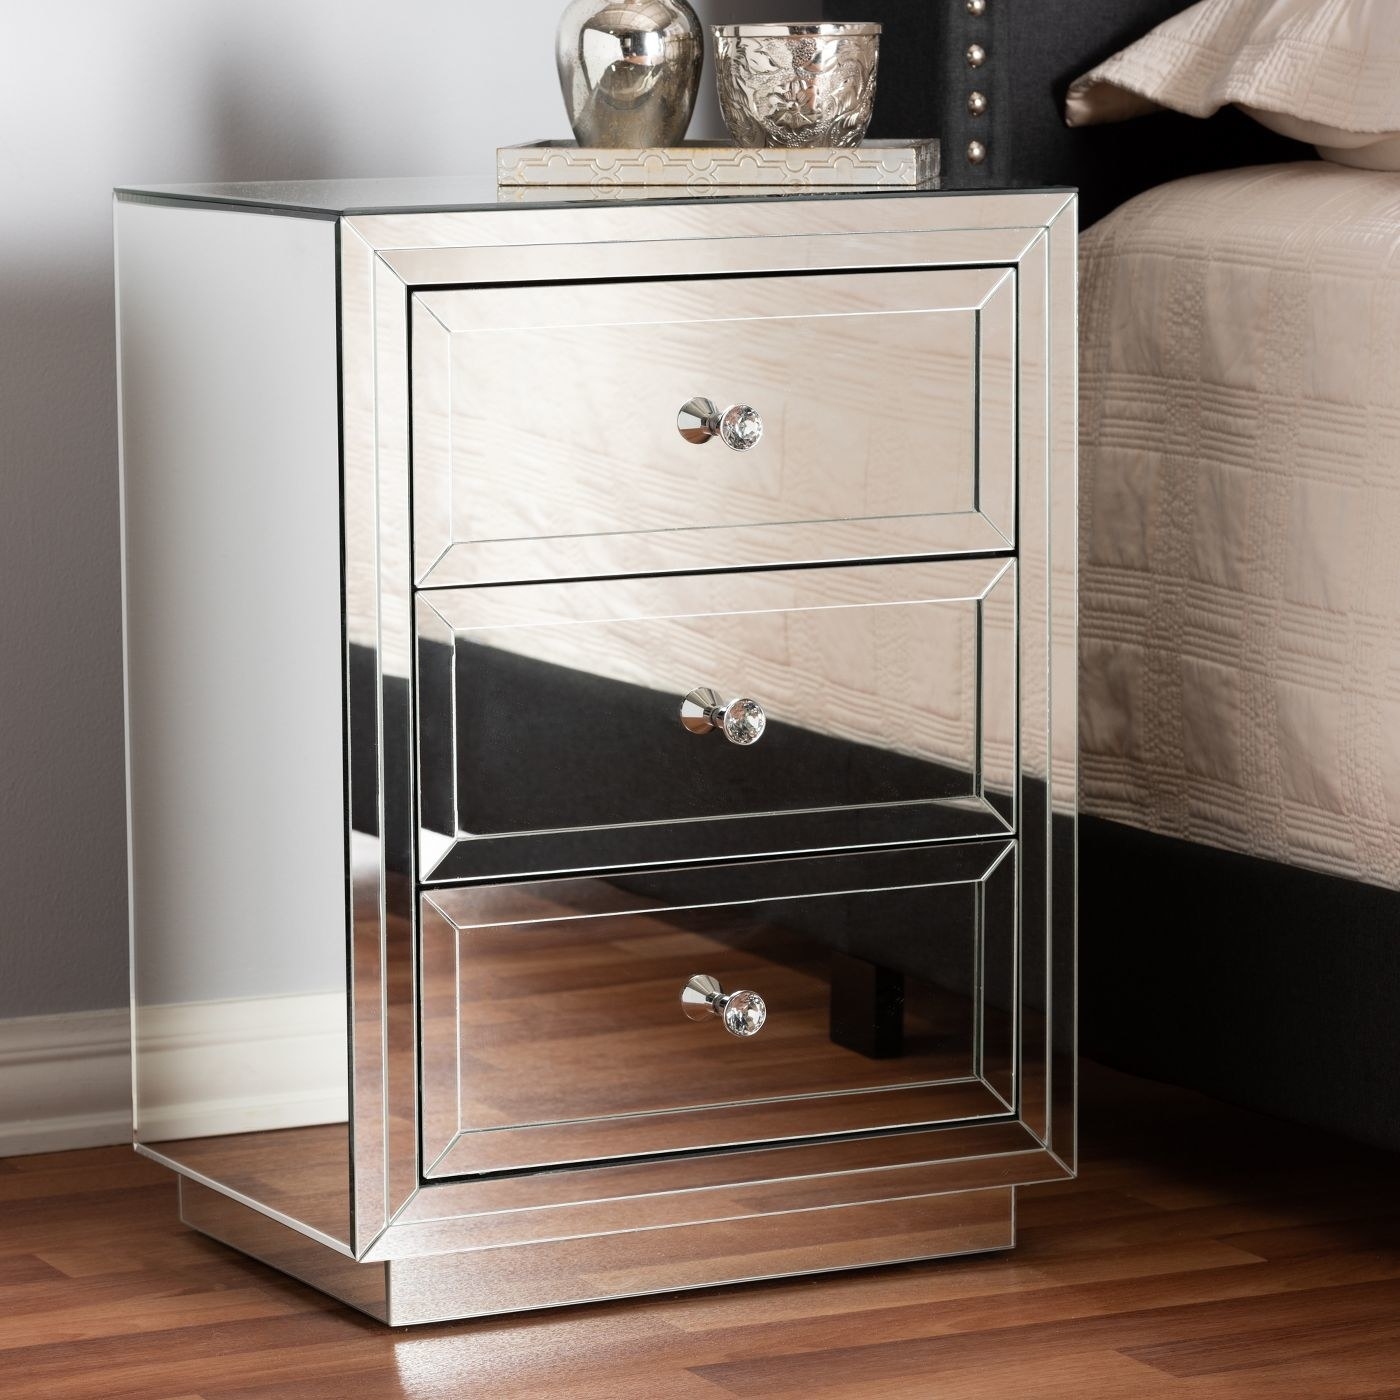 A three drawer mirrored nightstand with crystal knobs